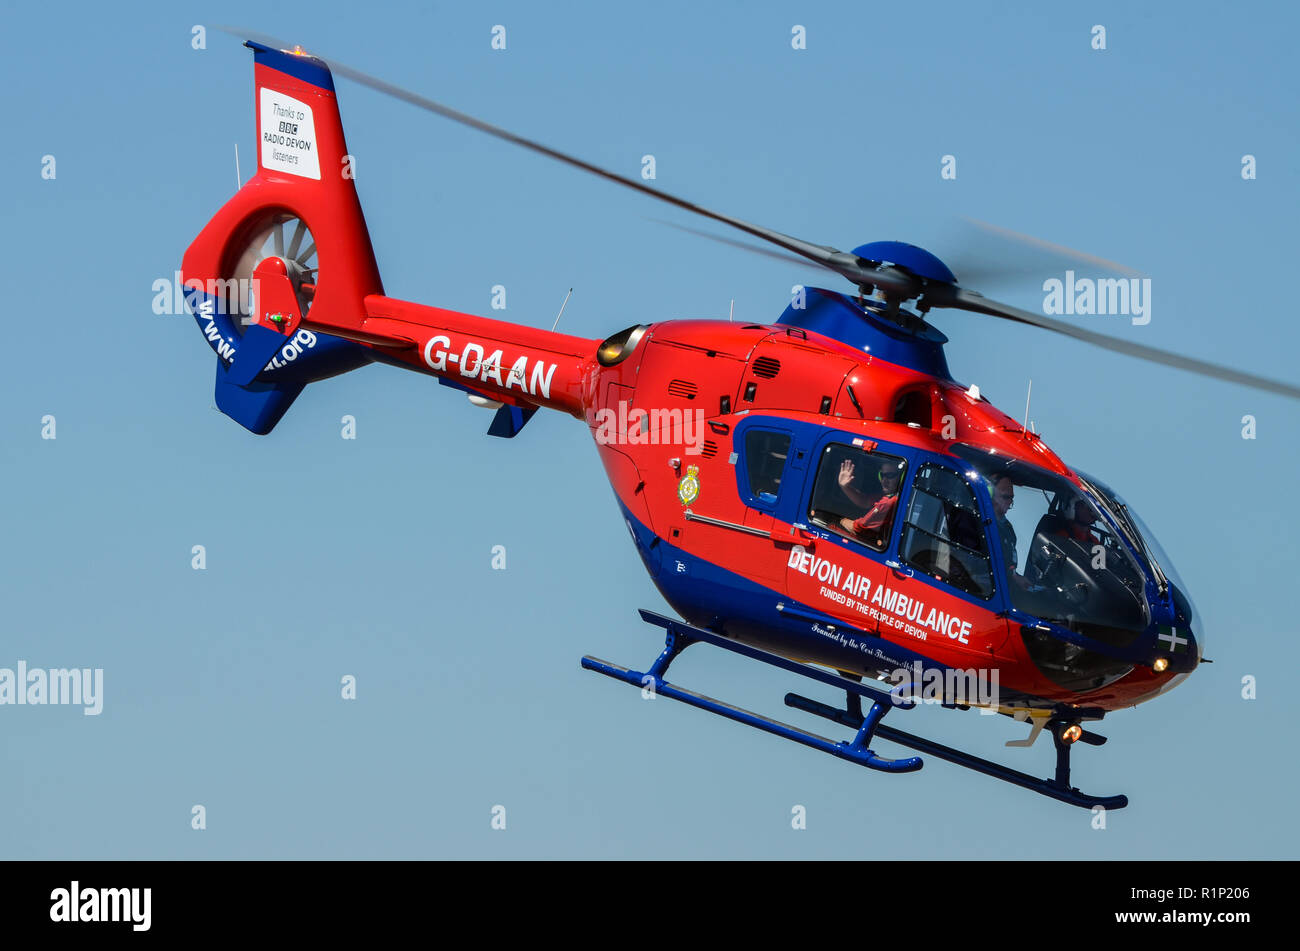 Devon Air Ambulance Eurocopter EC135 G-DAAN flying. Helimed emergency helicopter Stock Photo